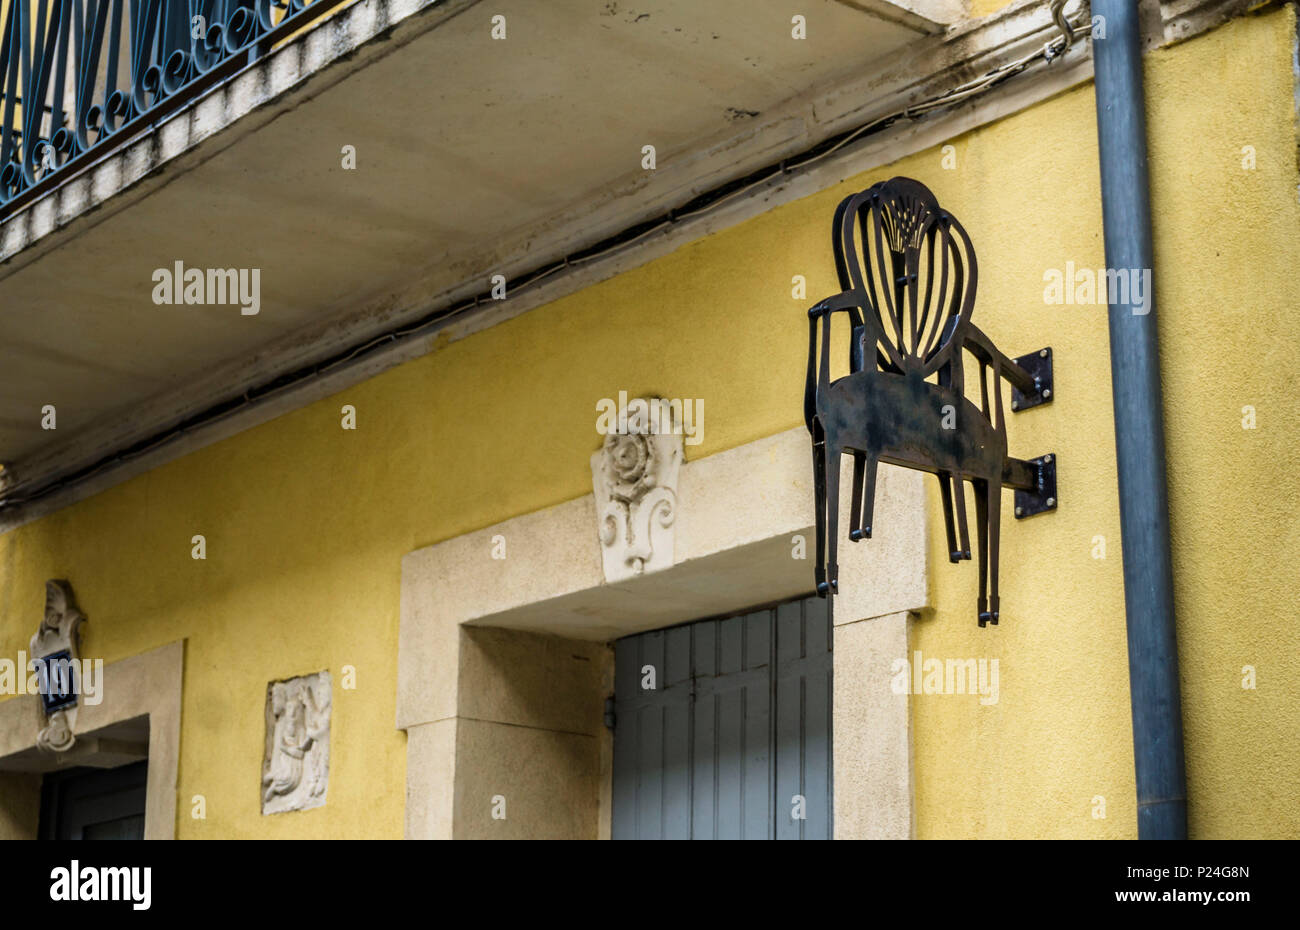 Advertising sign on a upholstery in Narbonne Stock Photo